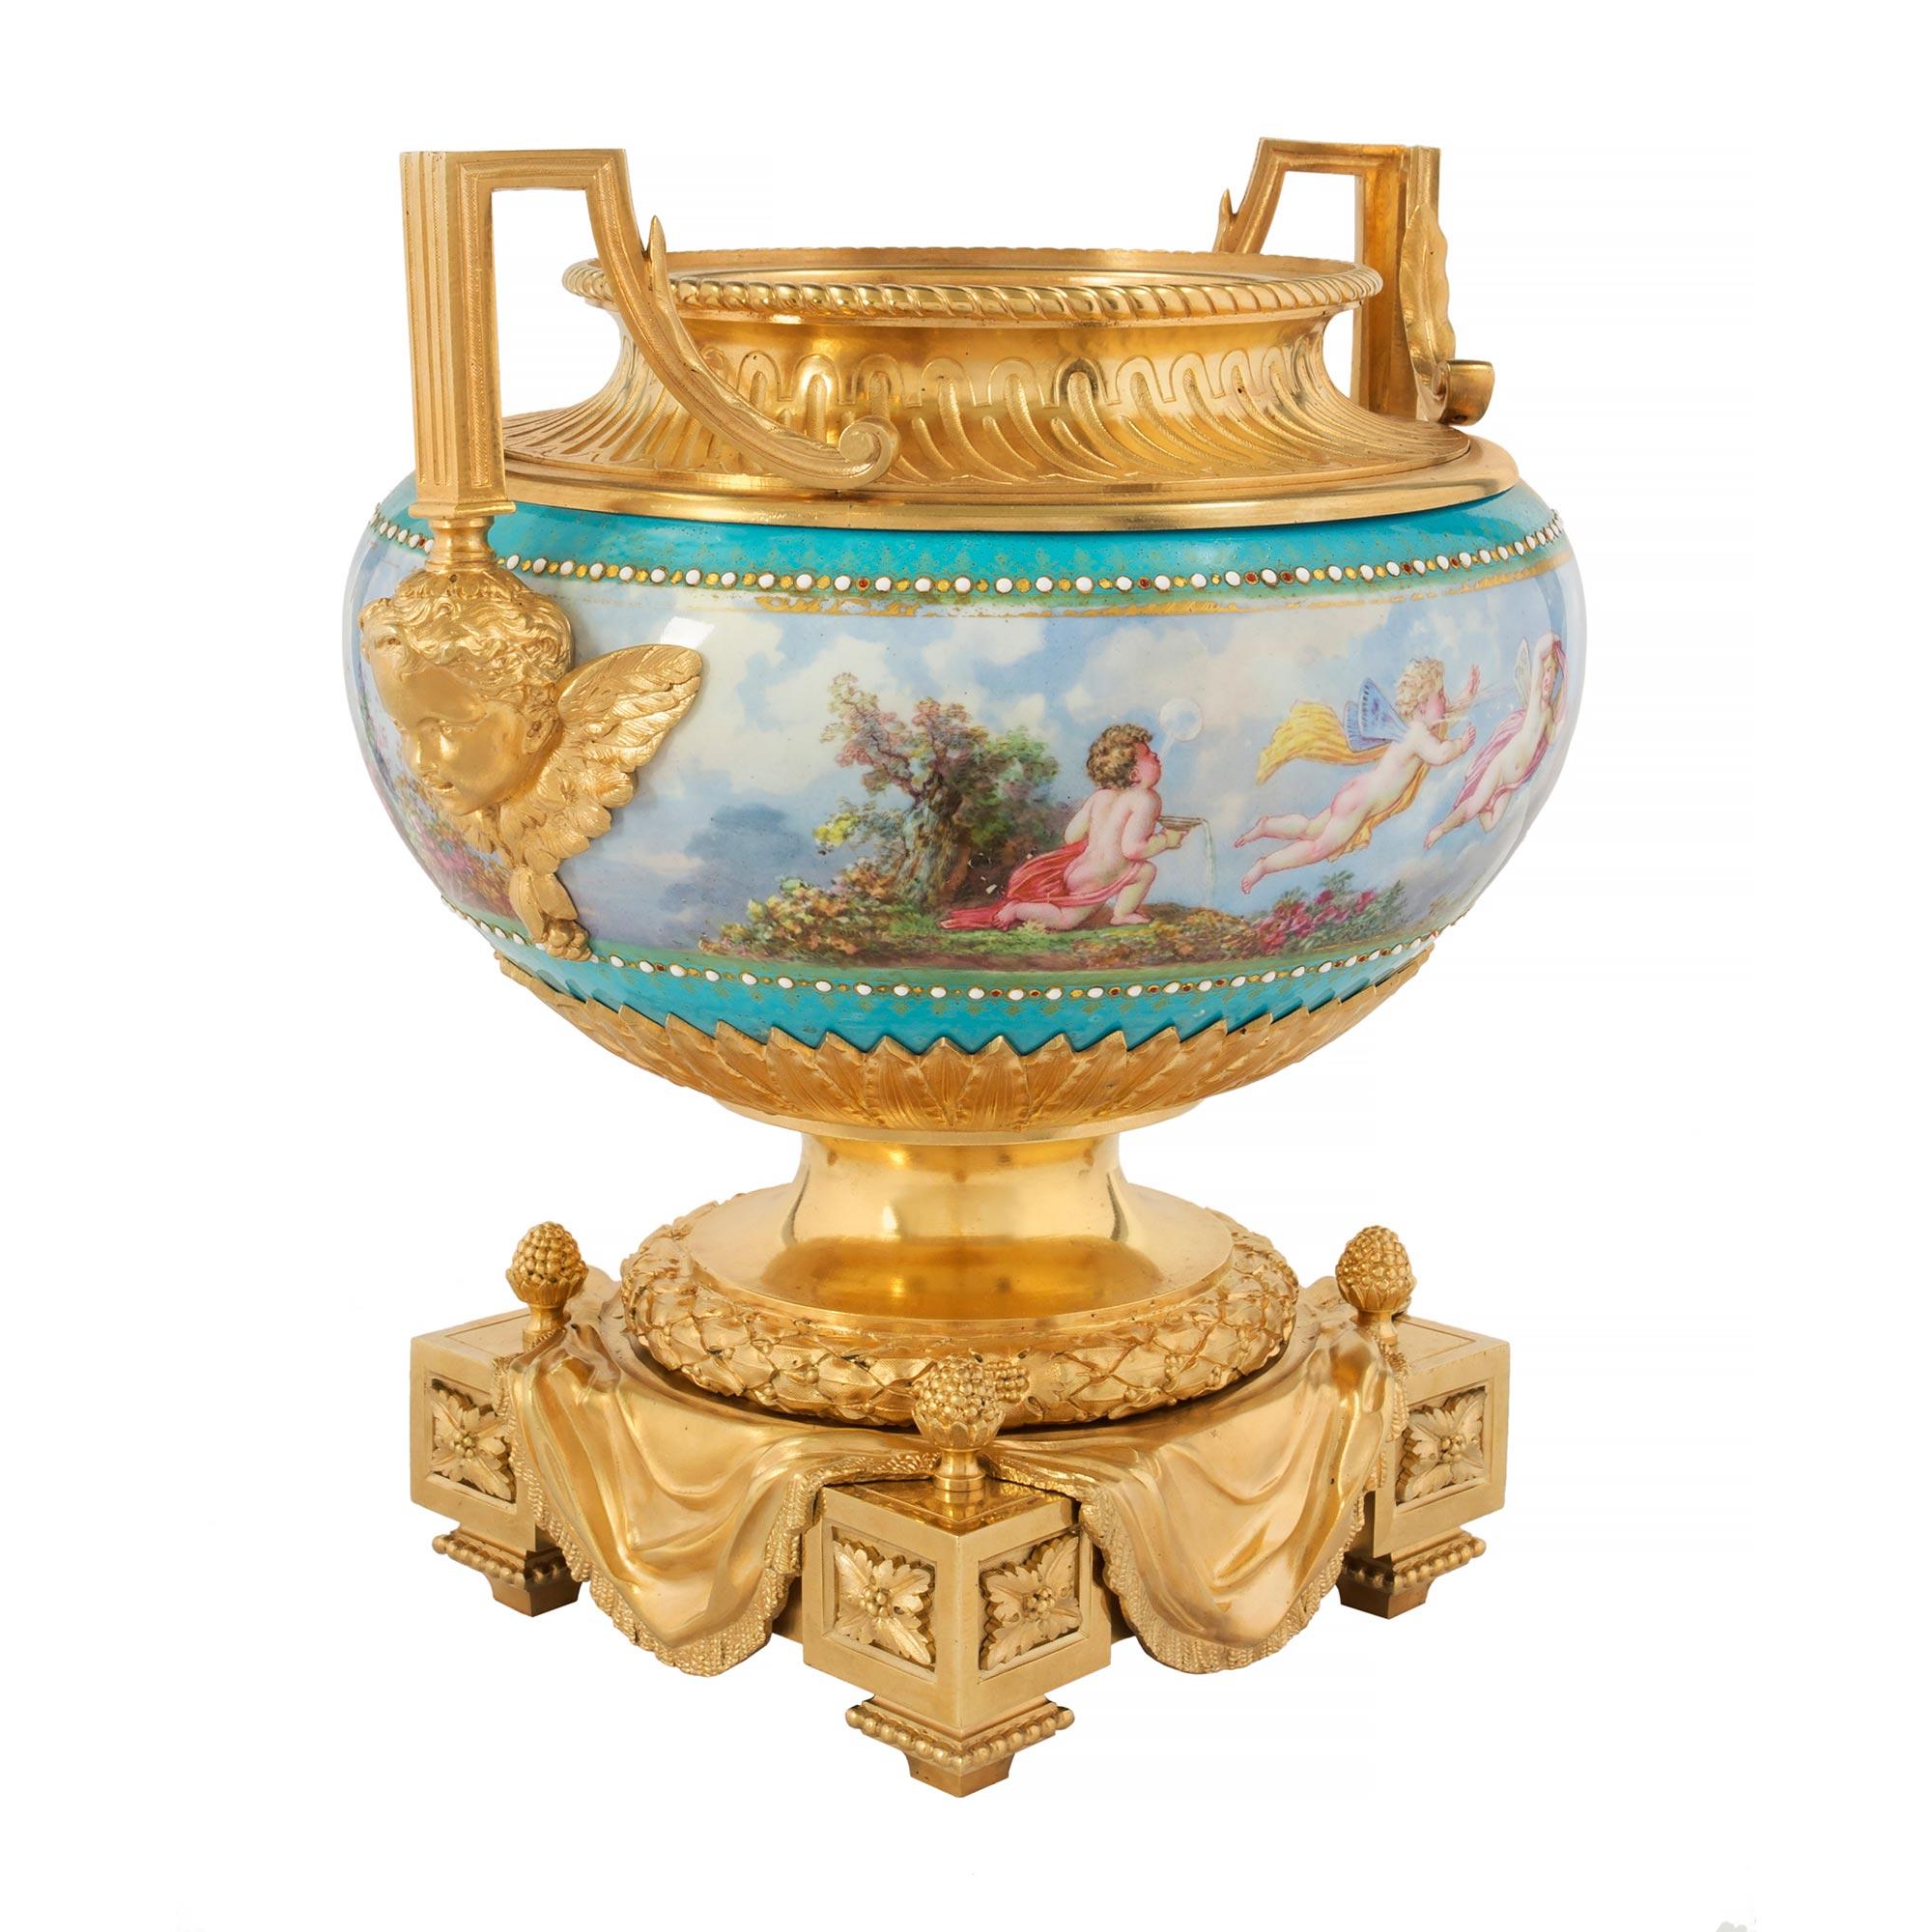 French 19th Century Louis XVI Style Ormolu and Enameled Porcelain Centerpiece For Sale 1